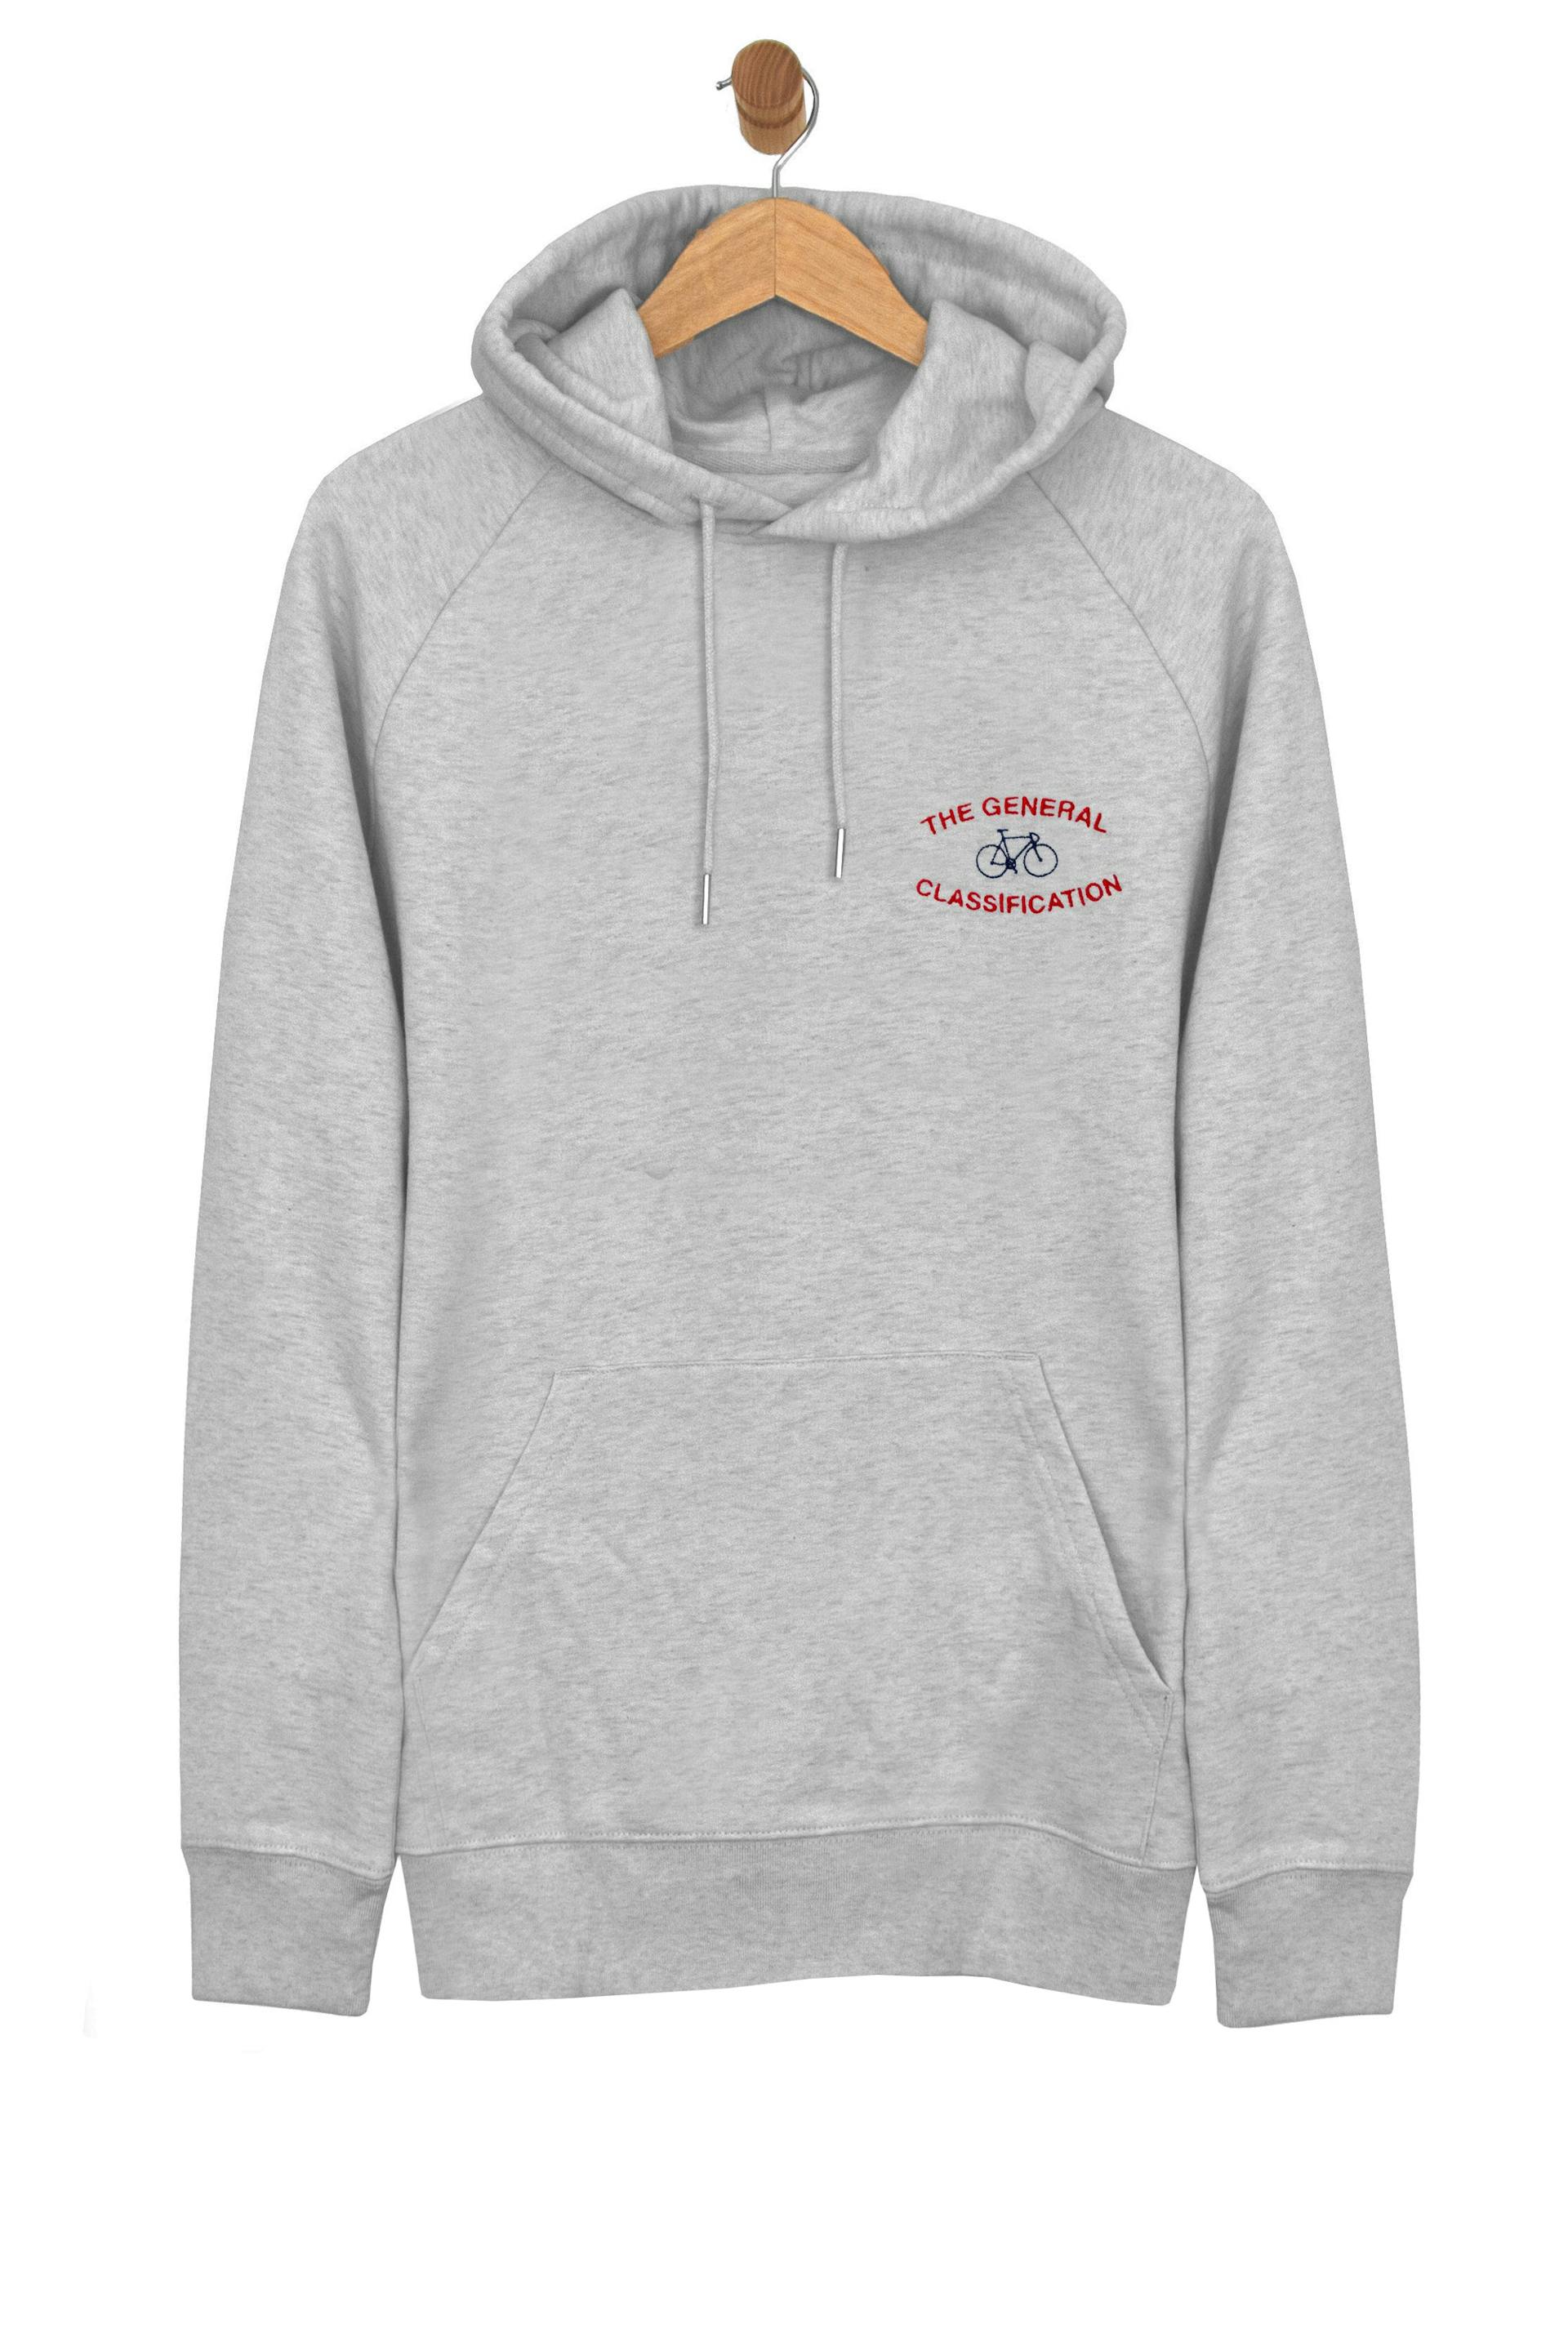 Stitched Median Bicycle Hood Heather Grey